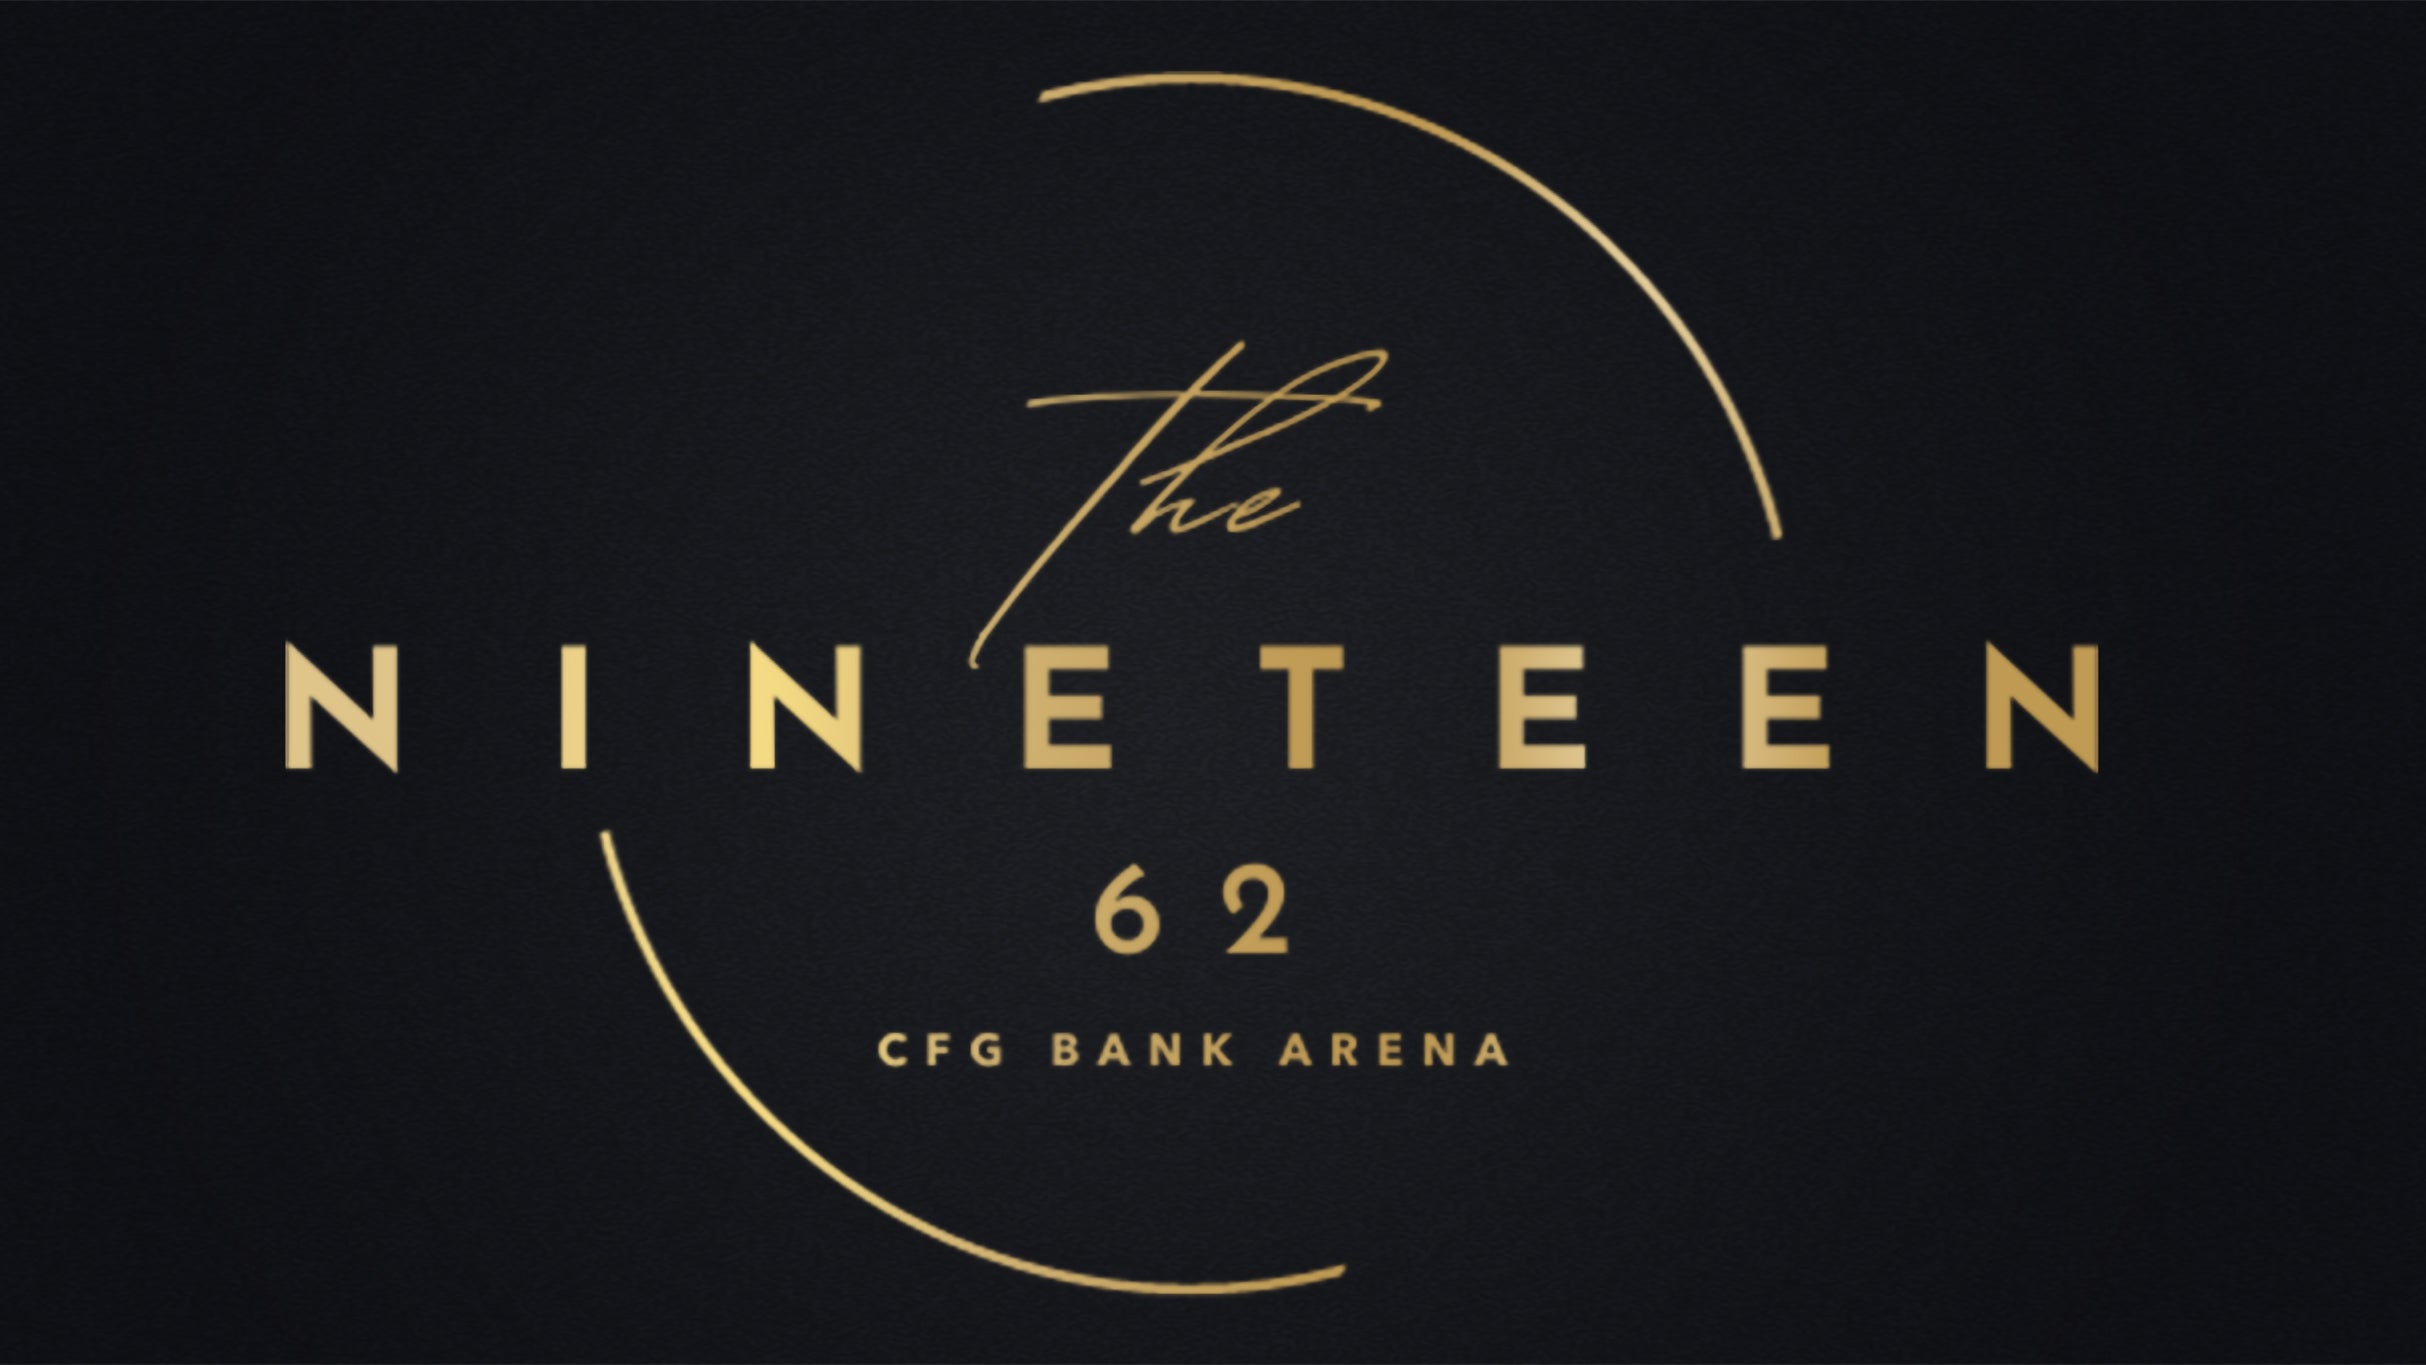 The NINETEEN 62 at CFG Bank Arena - Hot Wheels Monster Trucks Live in Baltimore promo photo for On sale presale offer code